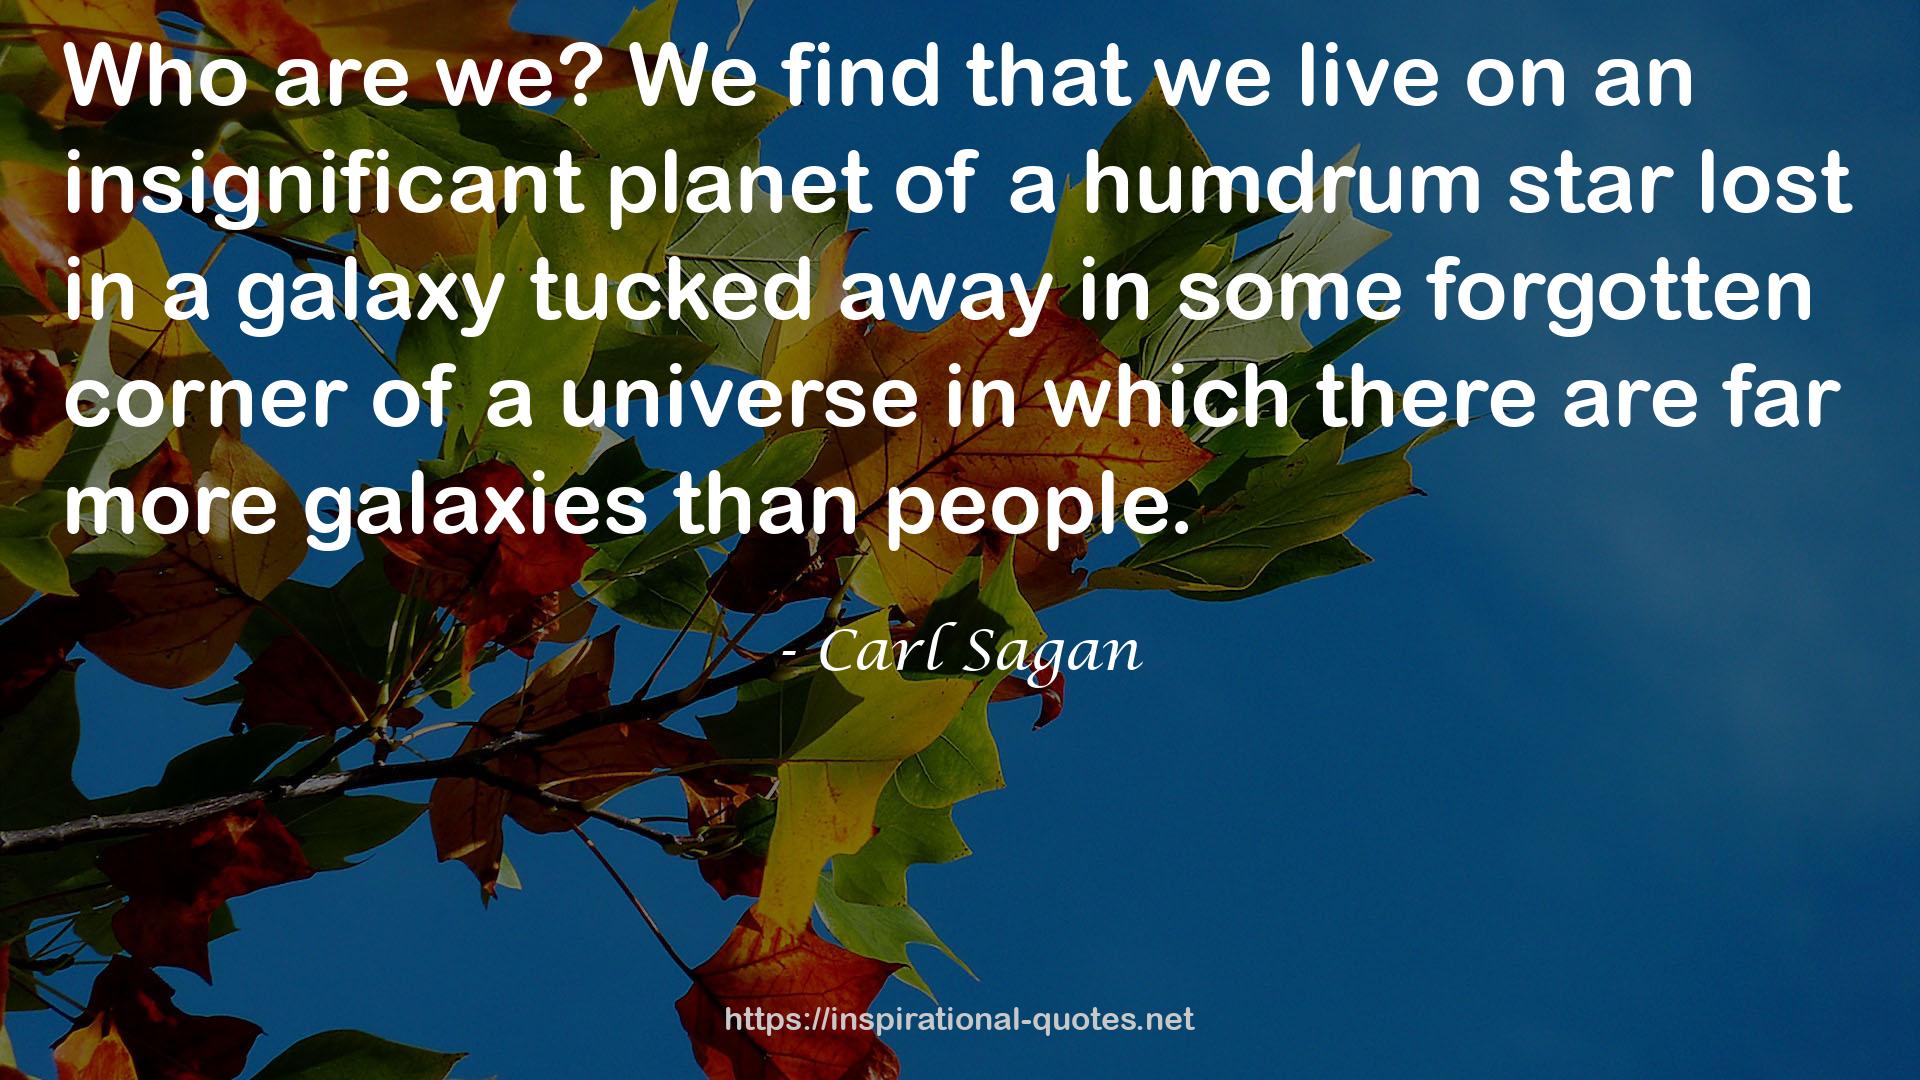 an insignificant planet  QUOTES